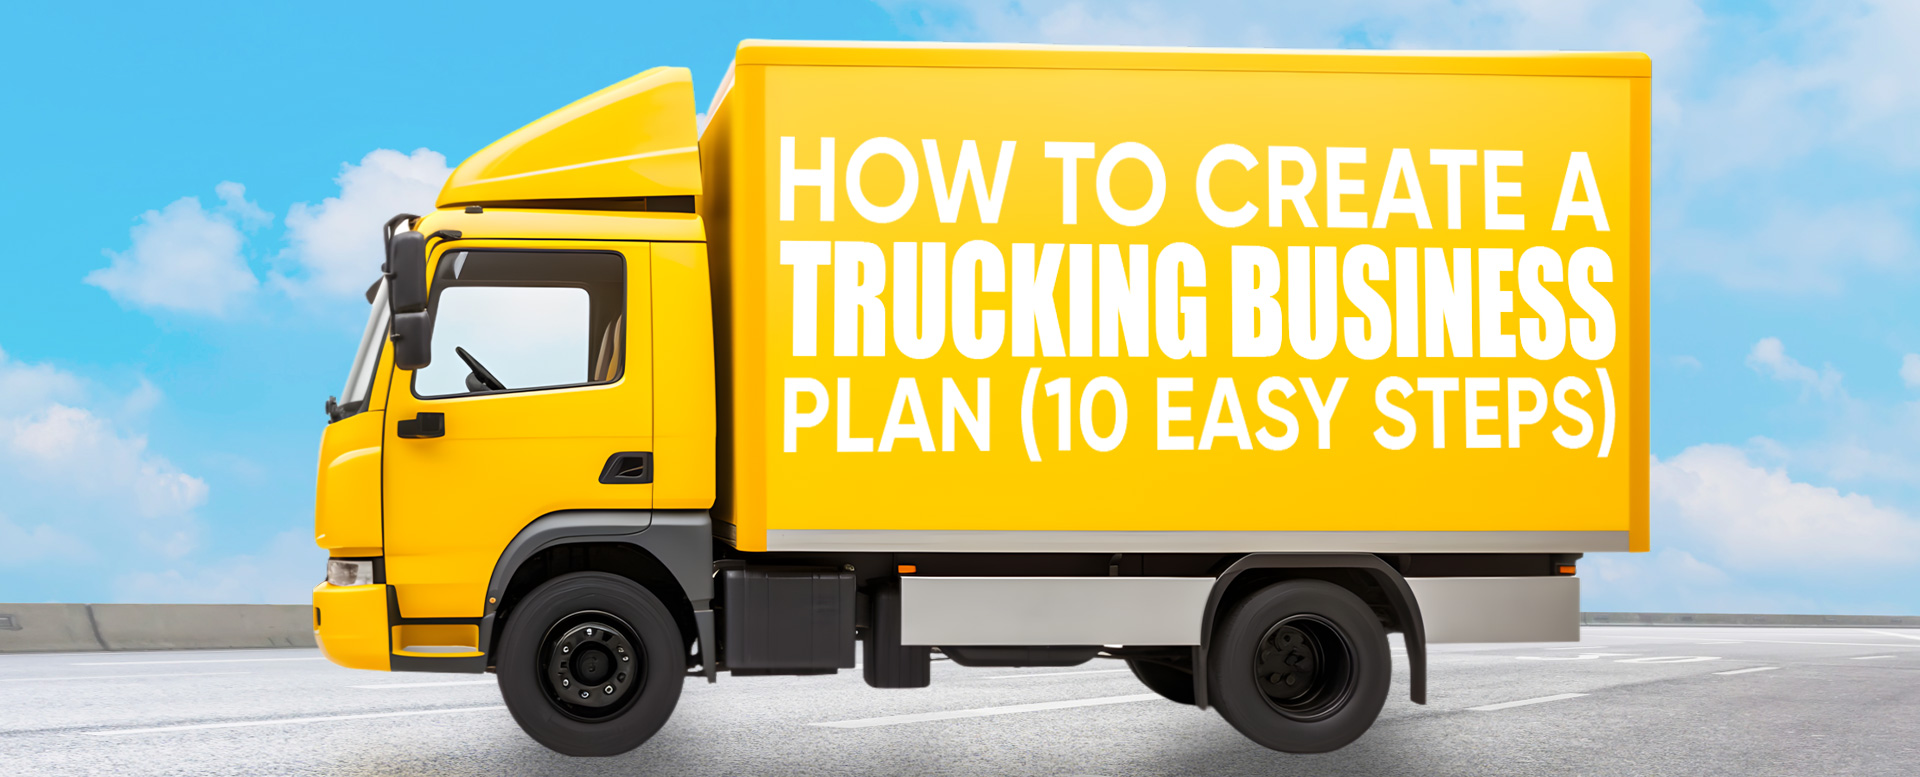 How to Create a Trucking Business Plan (10 Easy Steps)